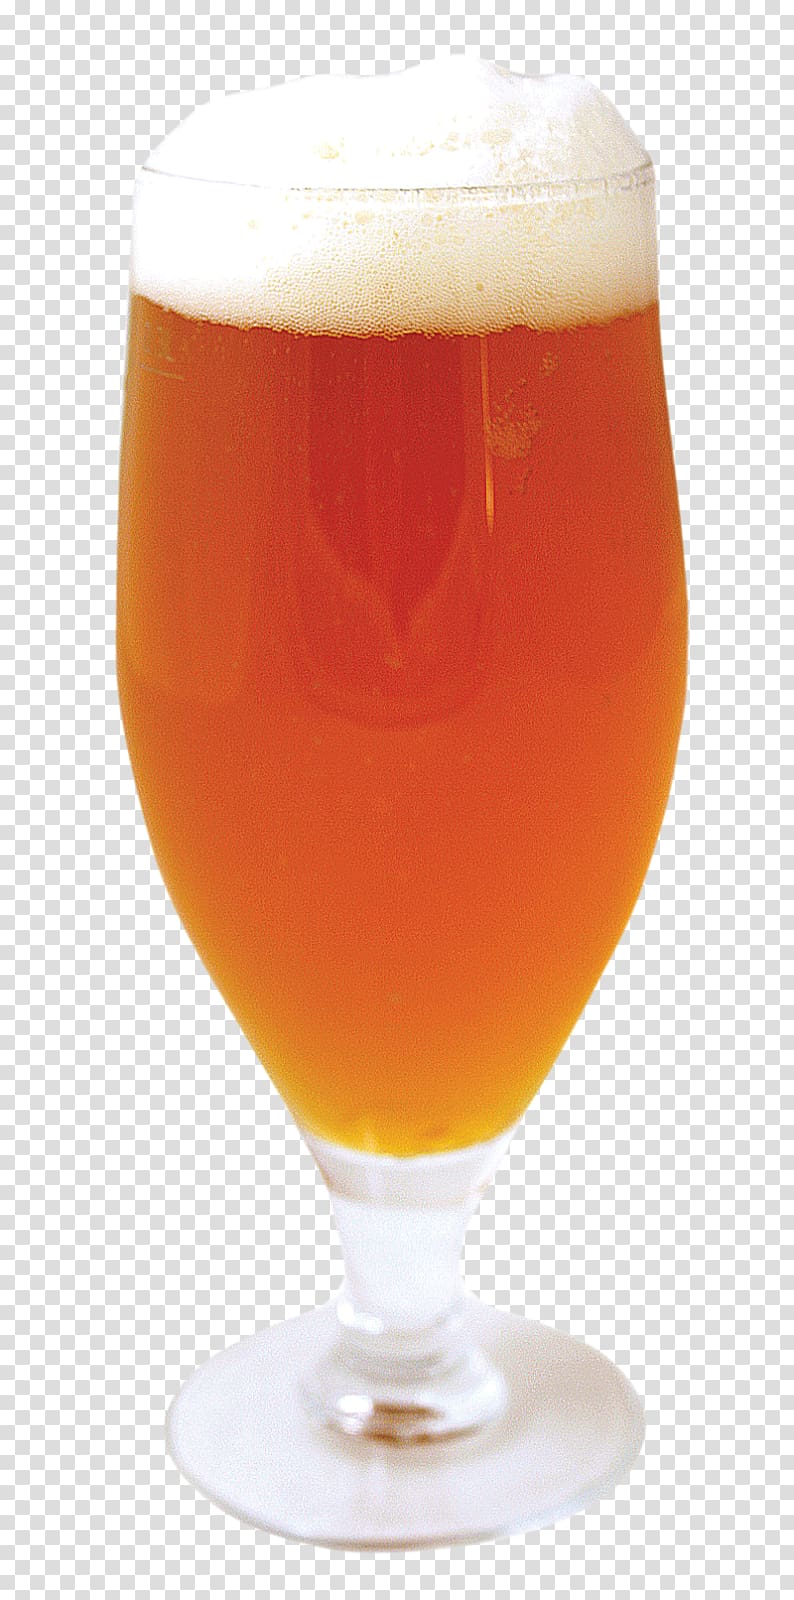 Wheat beer Tripel Free Beer, beverage transparent background PNG clipart